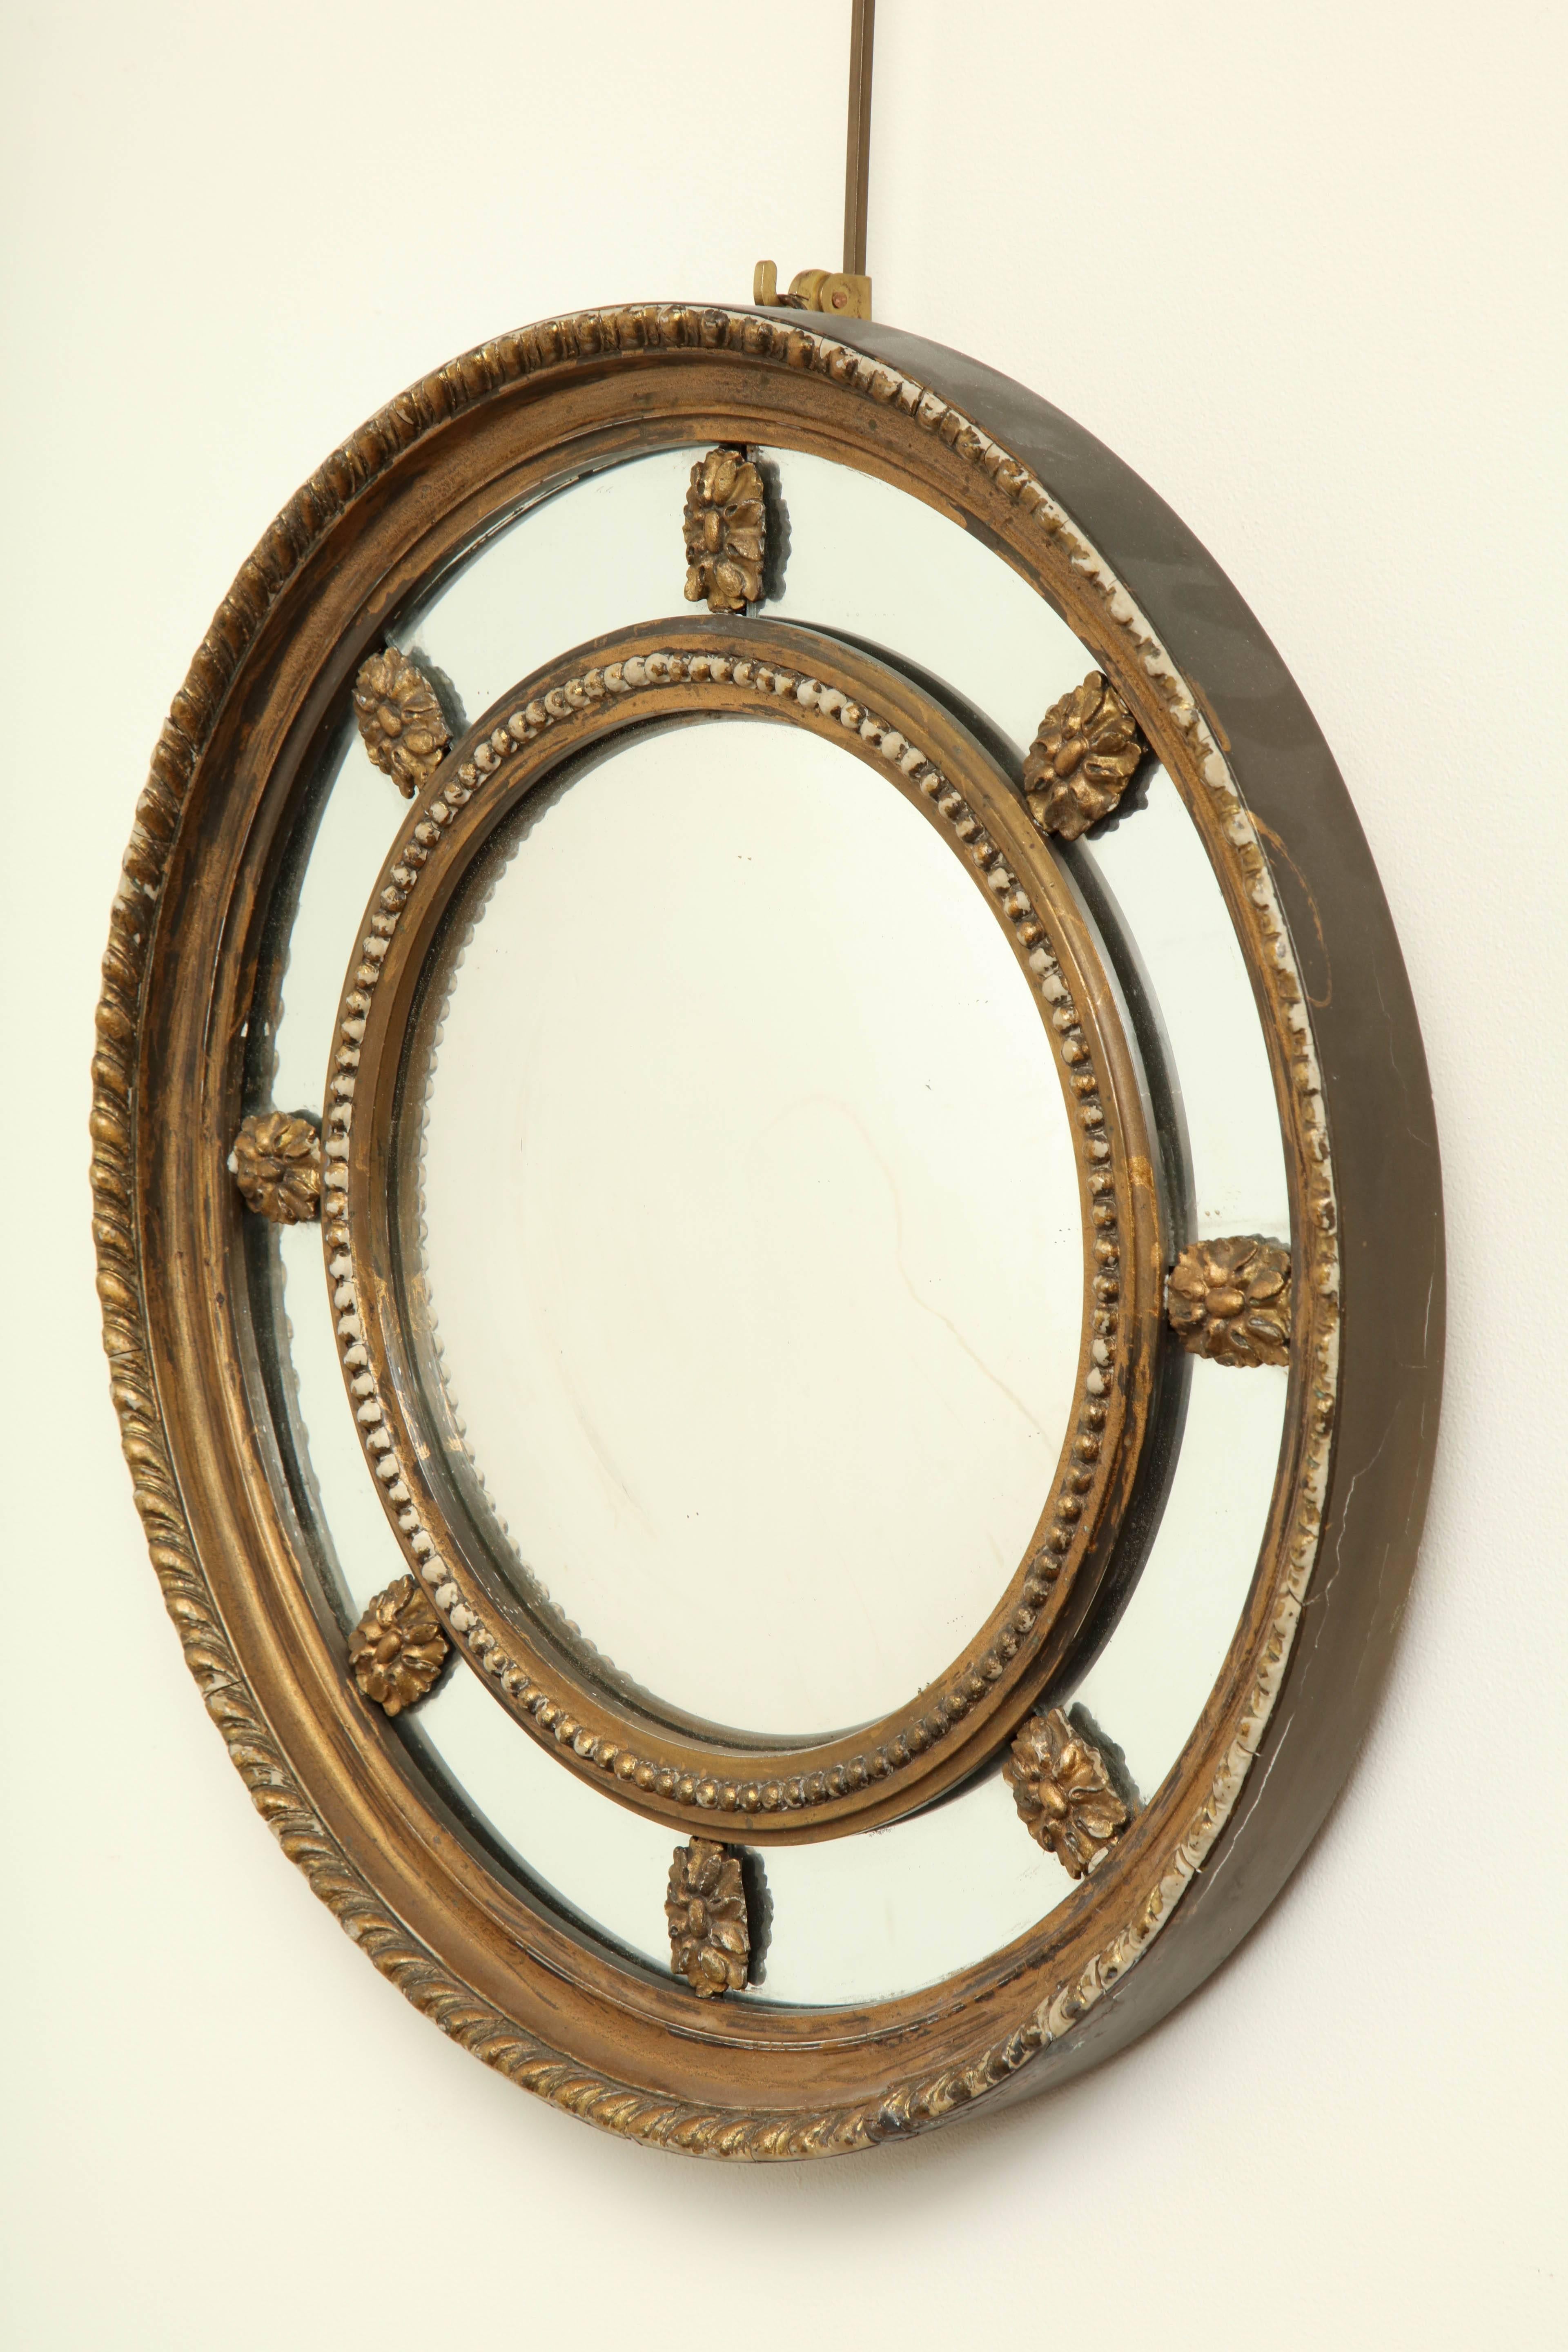 19th century English, sectionalized convex mirror.